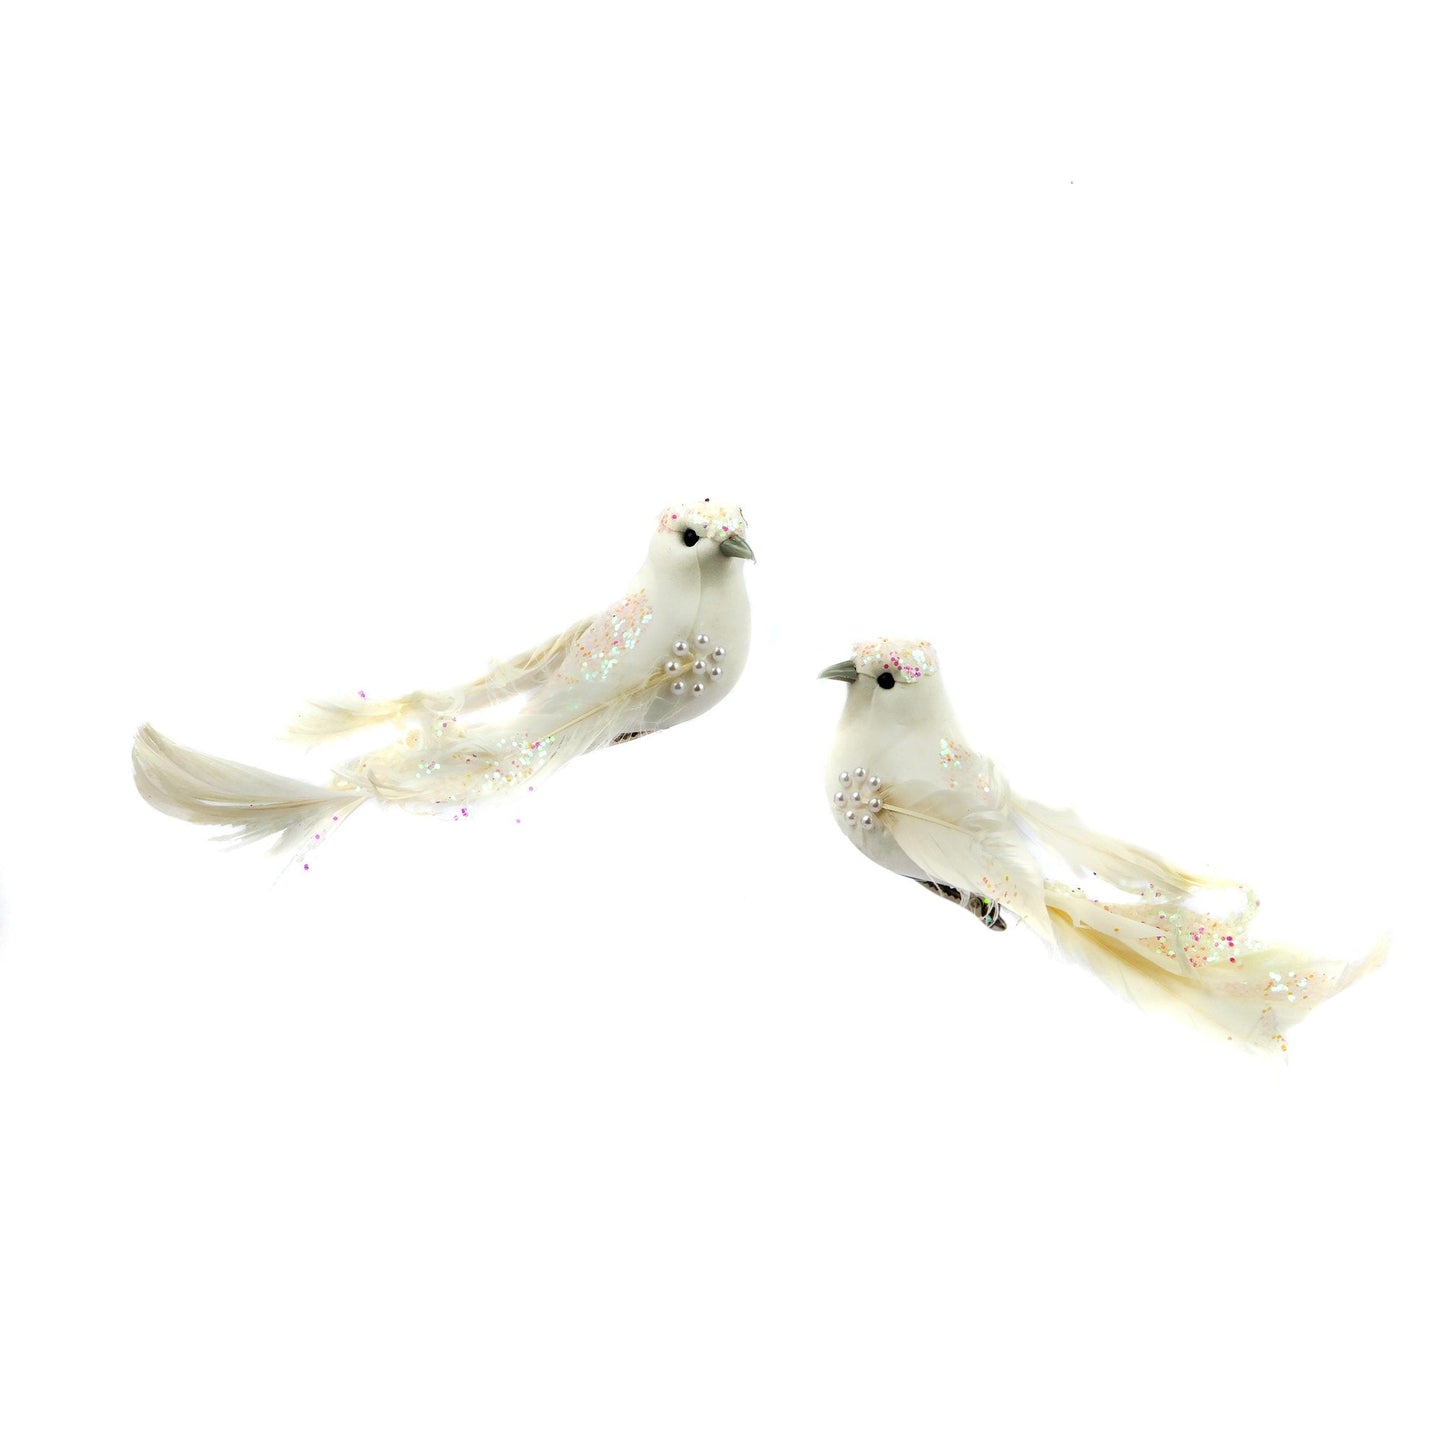 TEST SONG BIRD WHITE FEATHER TAIL ORNAMENT